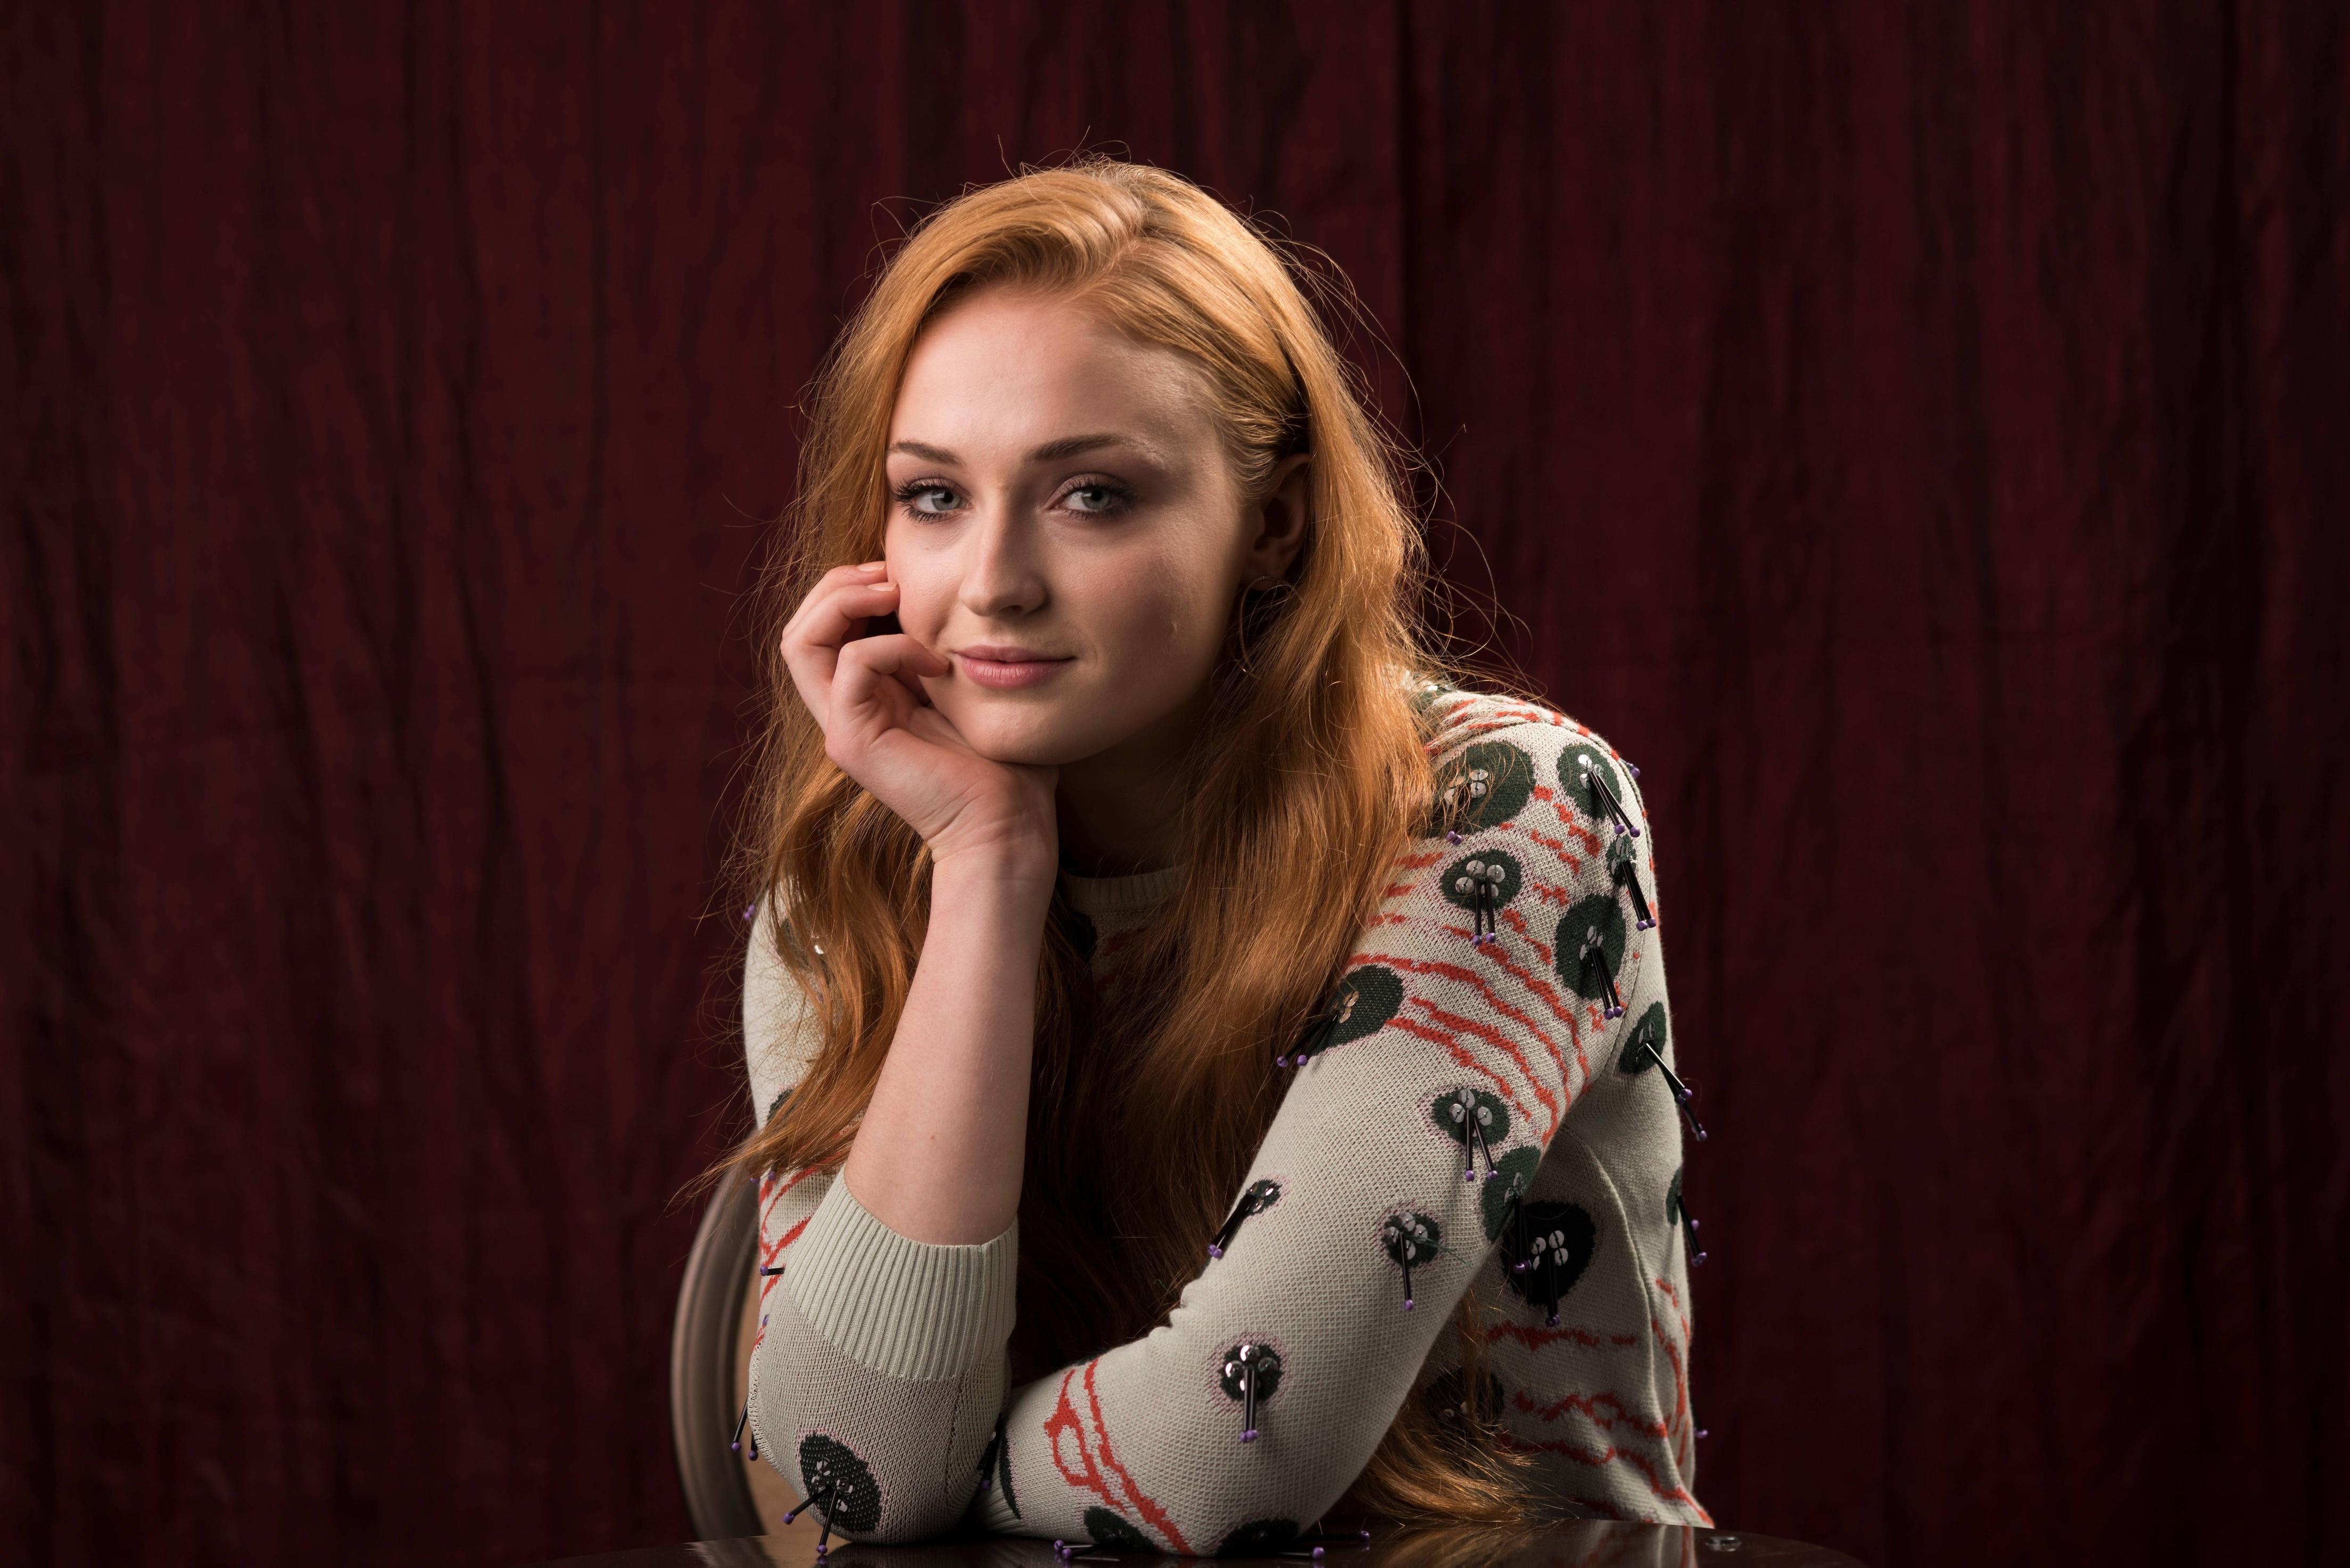 sophie turner, actress, american, celebrity, redhead